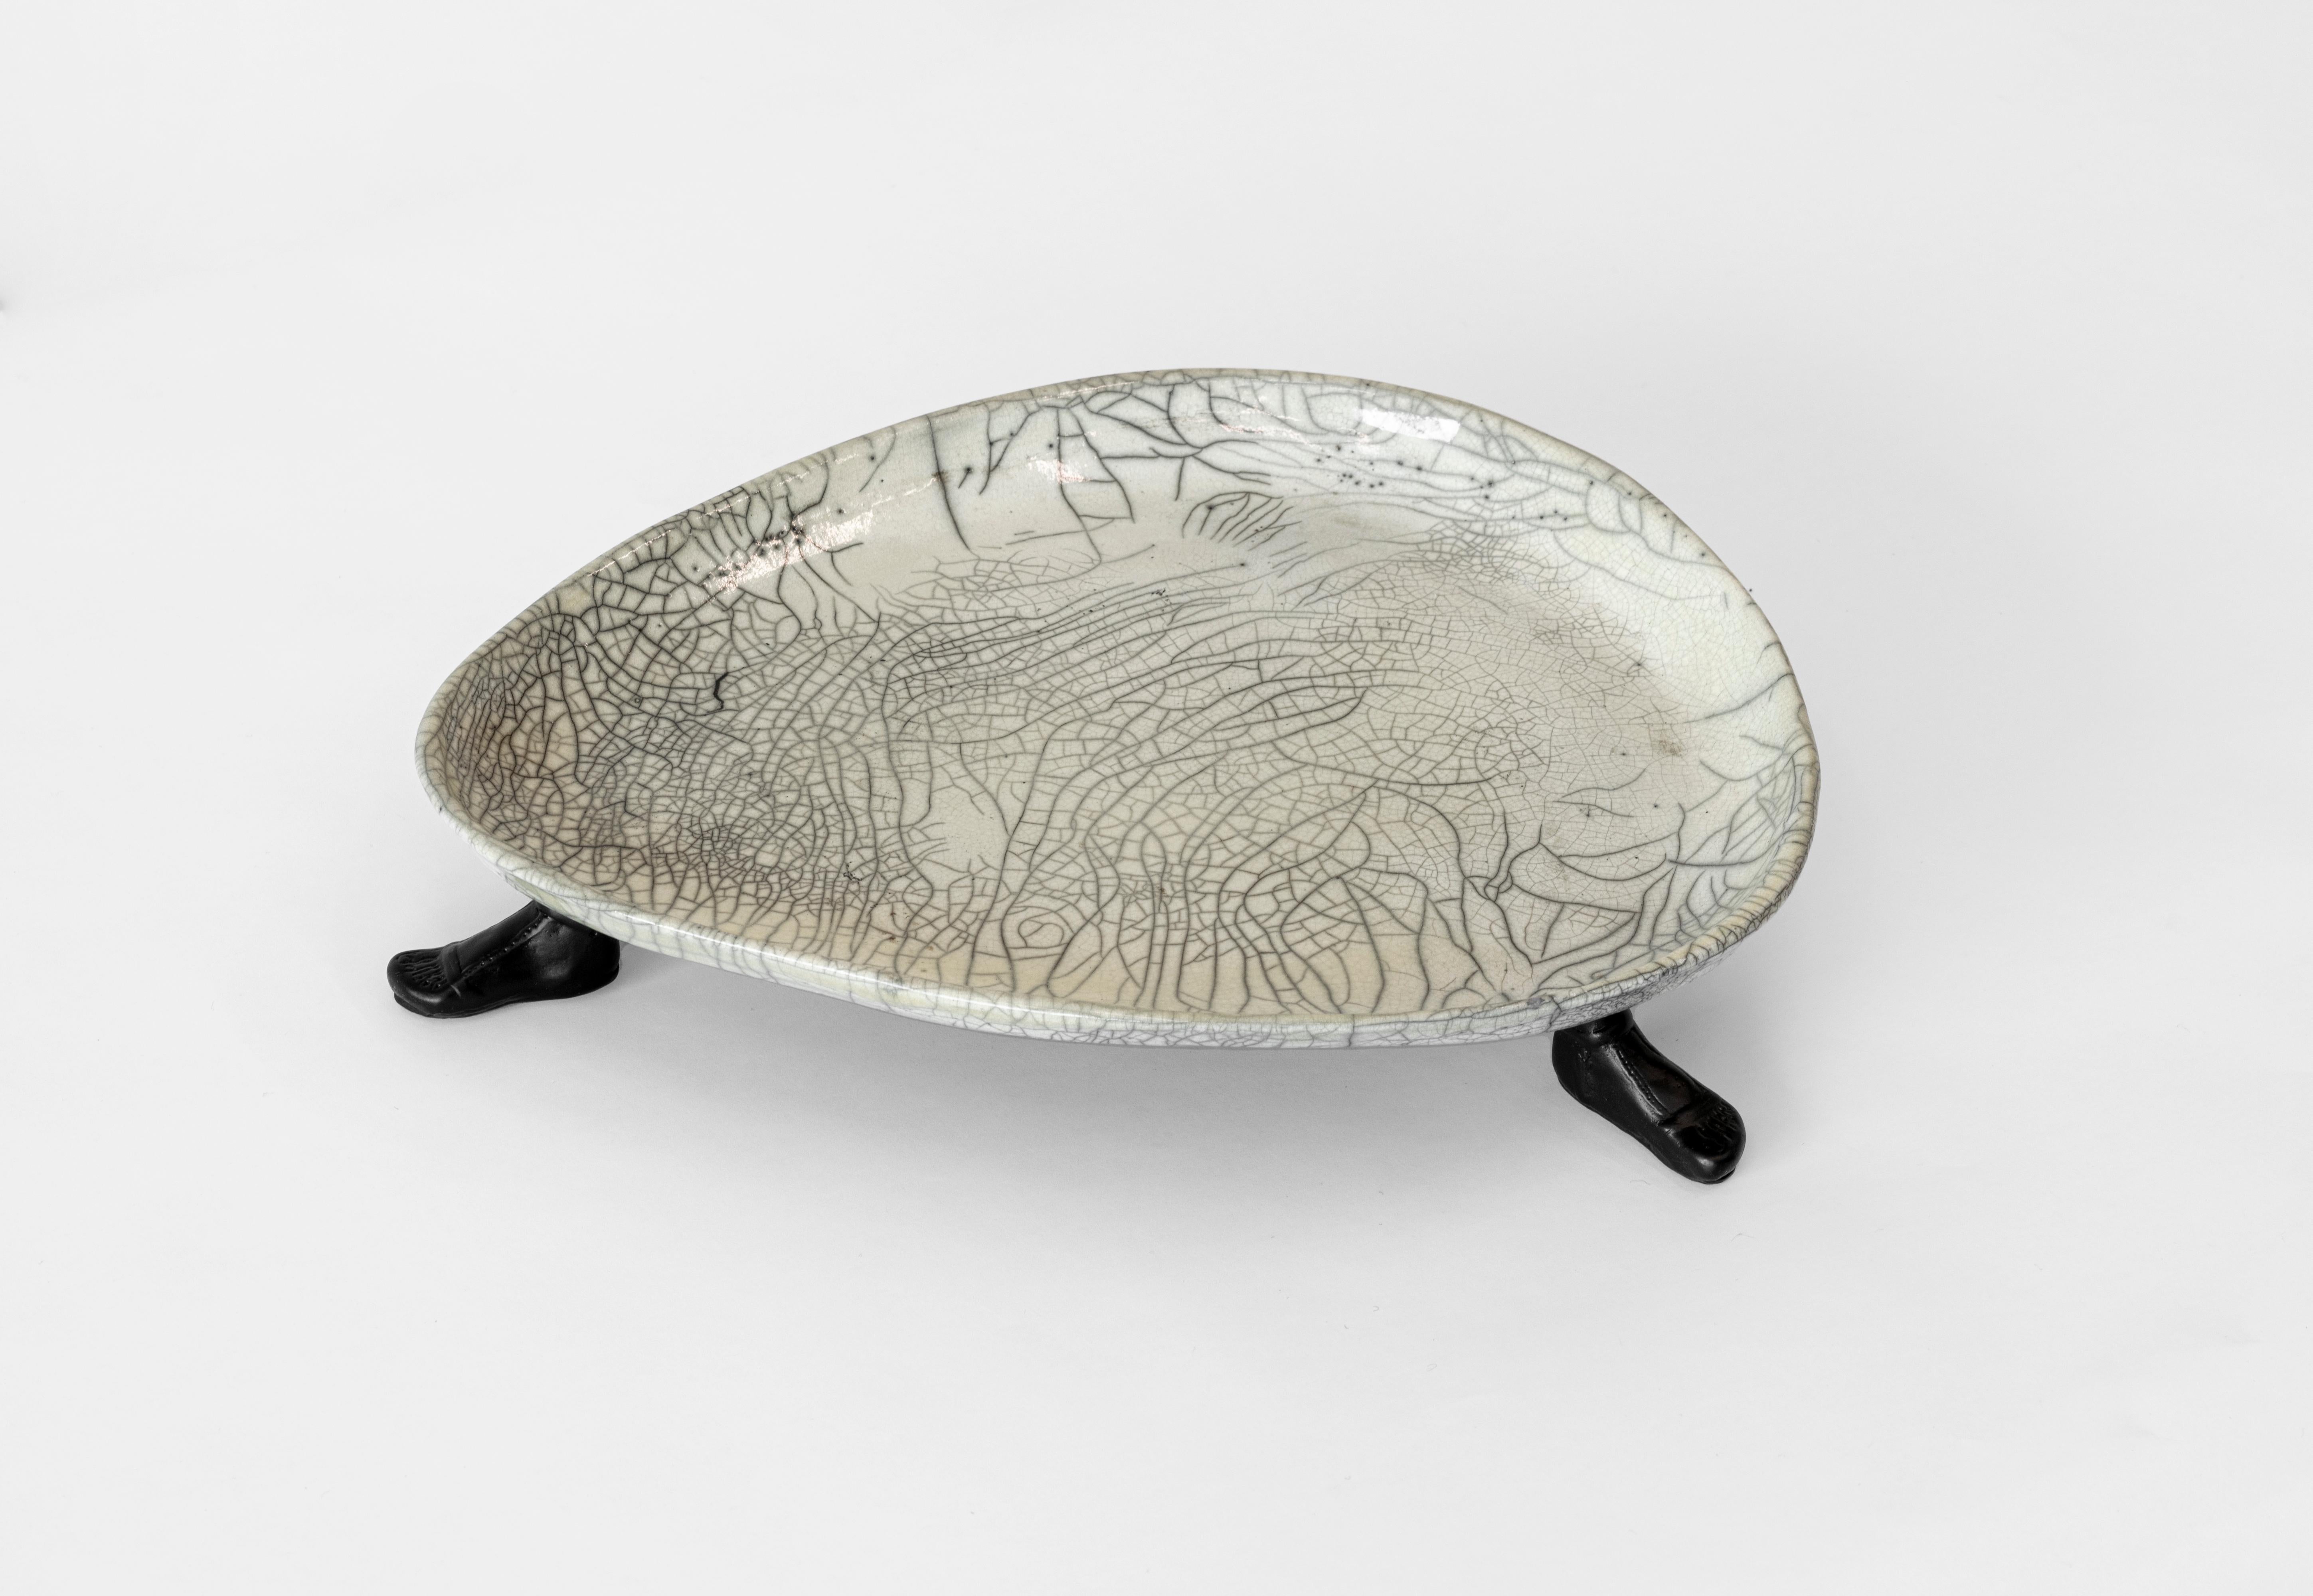 Parchment and patinated bronze tray or centerpiece by Aldus. Edition of 100.

A collaboration between Achille Salvagni and Fabio Gnessi, Aldus aims to Revive the aesthetic ideals of Greek and Latin philosophy. Functional and aesthetic objects